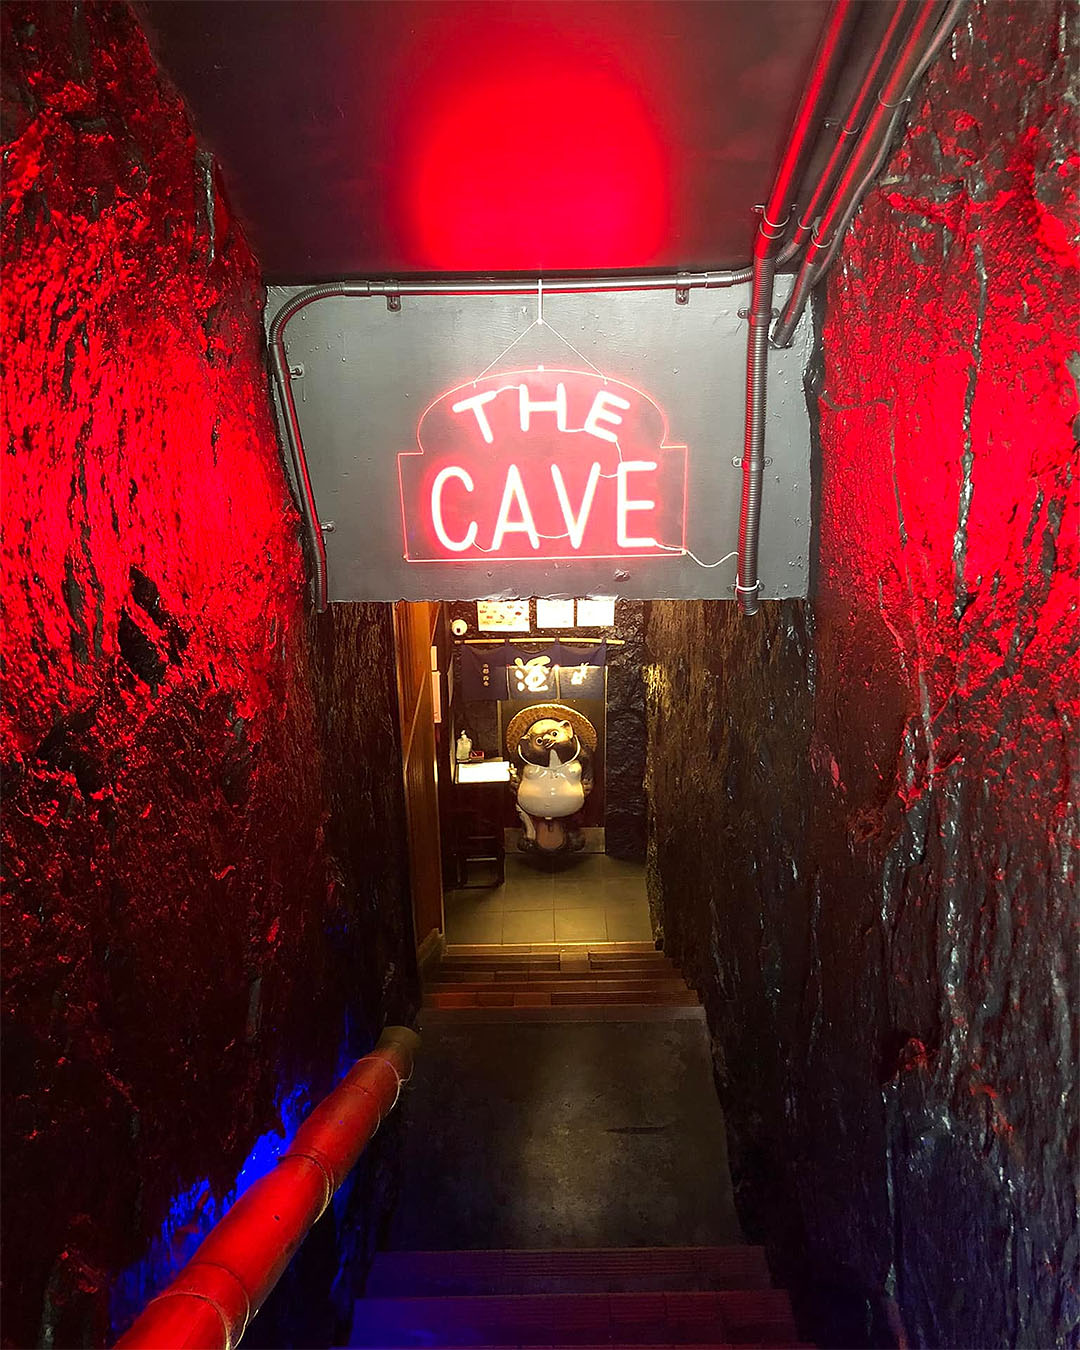 The neon-lit entrance to Tanuki's Cave.